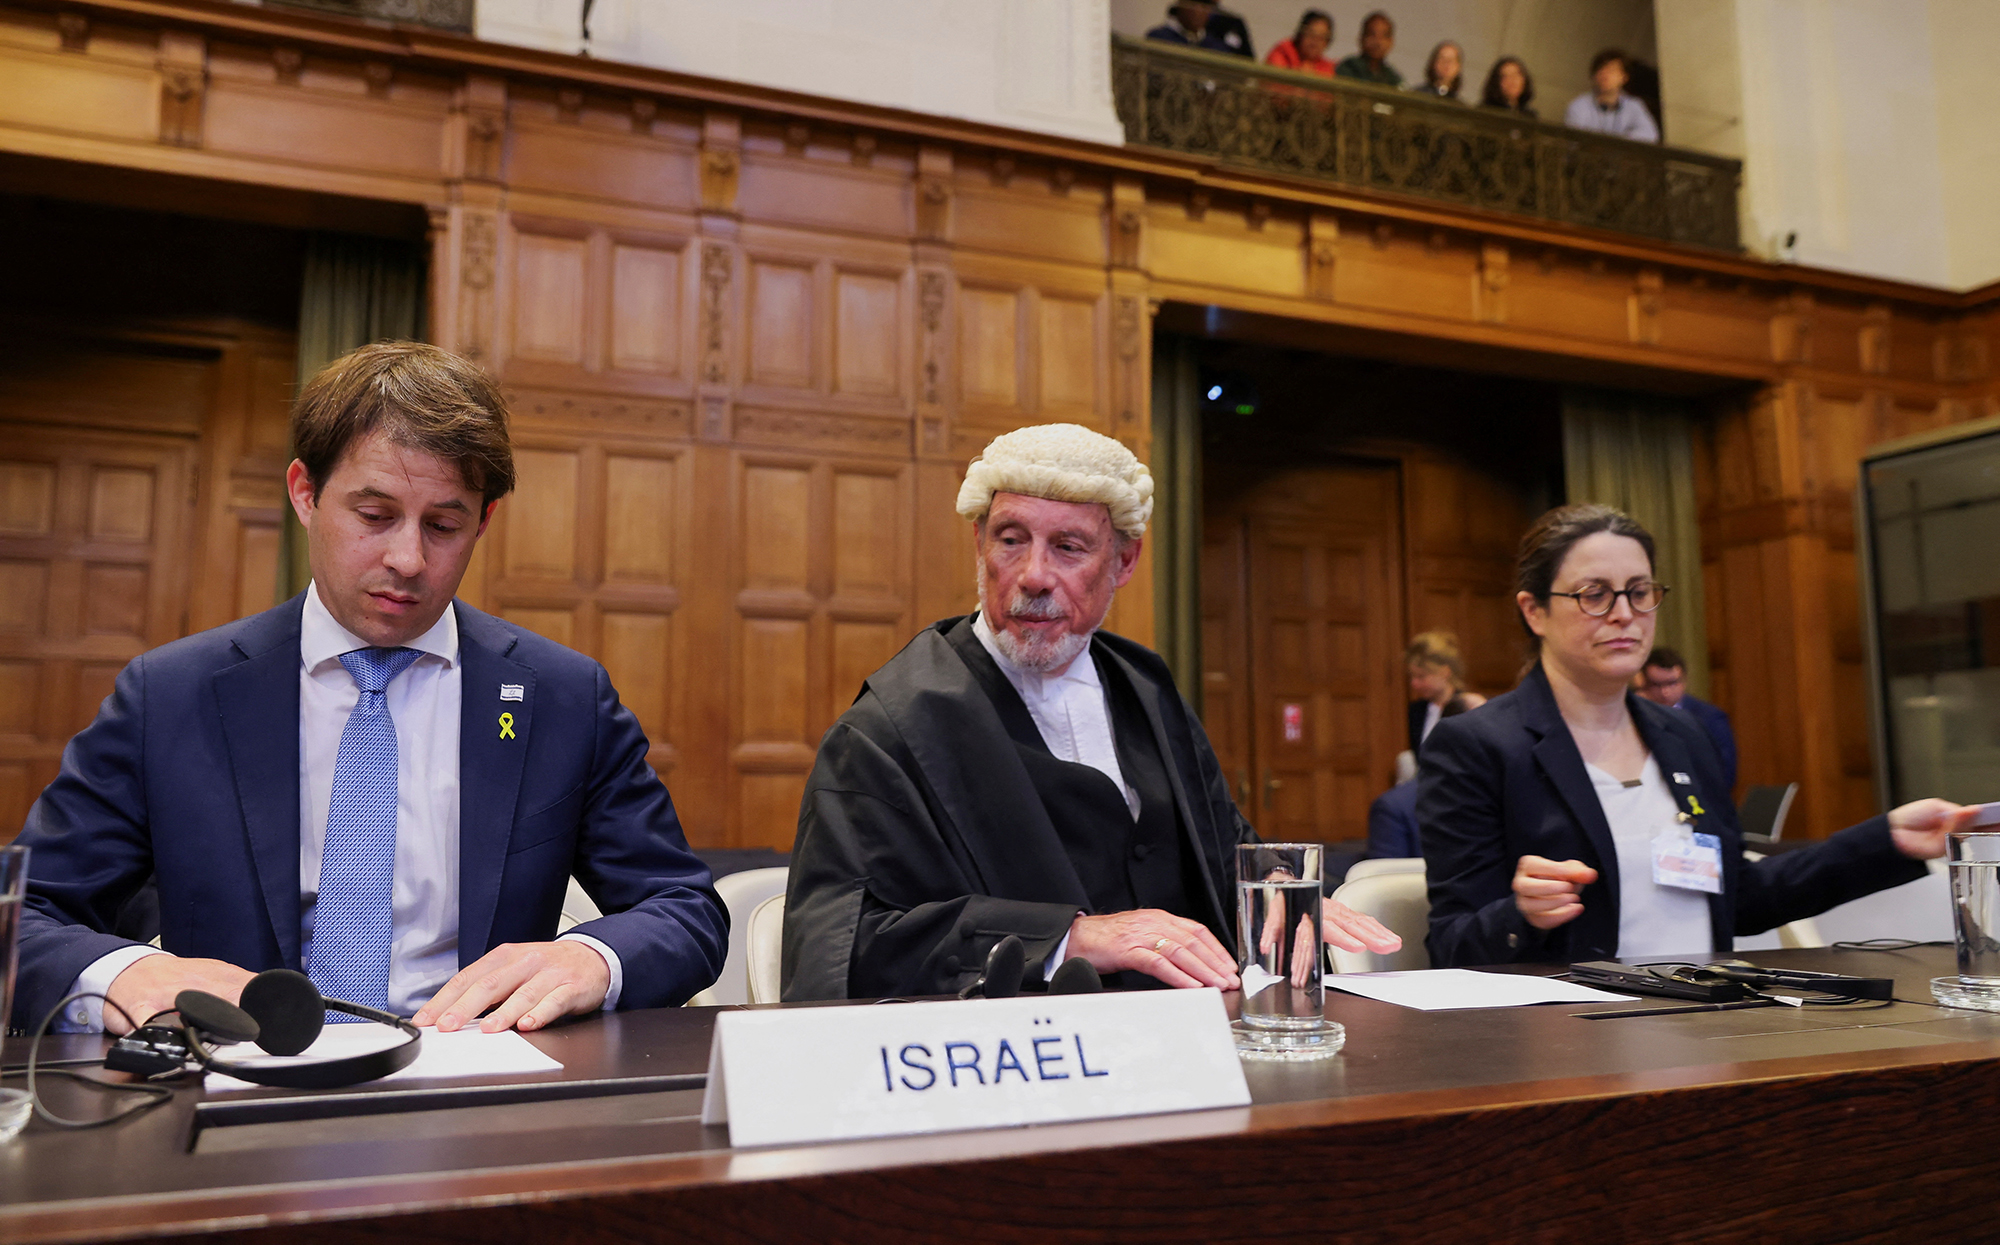 British jurist Malcolm Shaw, center, and Yaron Wax, left, look on at the International Court of Justice during the case brought before the Hague-based court by South Africa accusing Israel of genocide, in The Hague, Netherlands, on May 24.